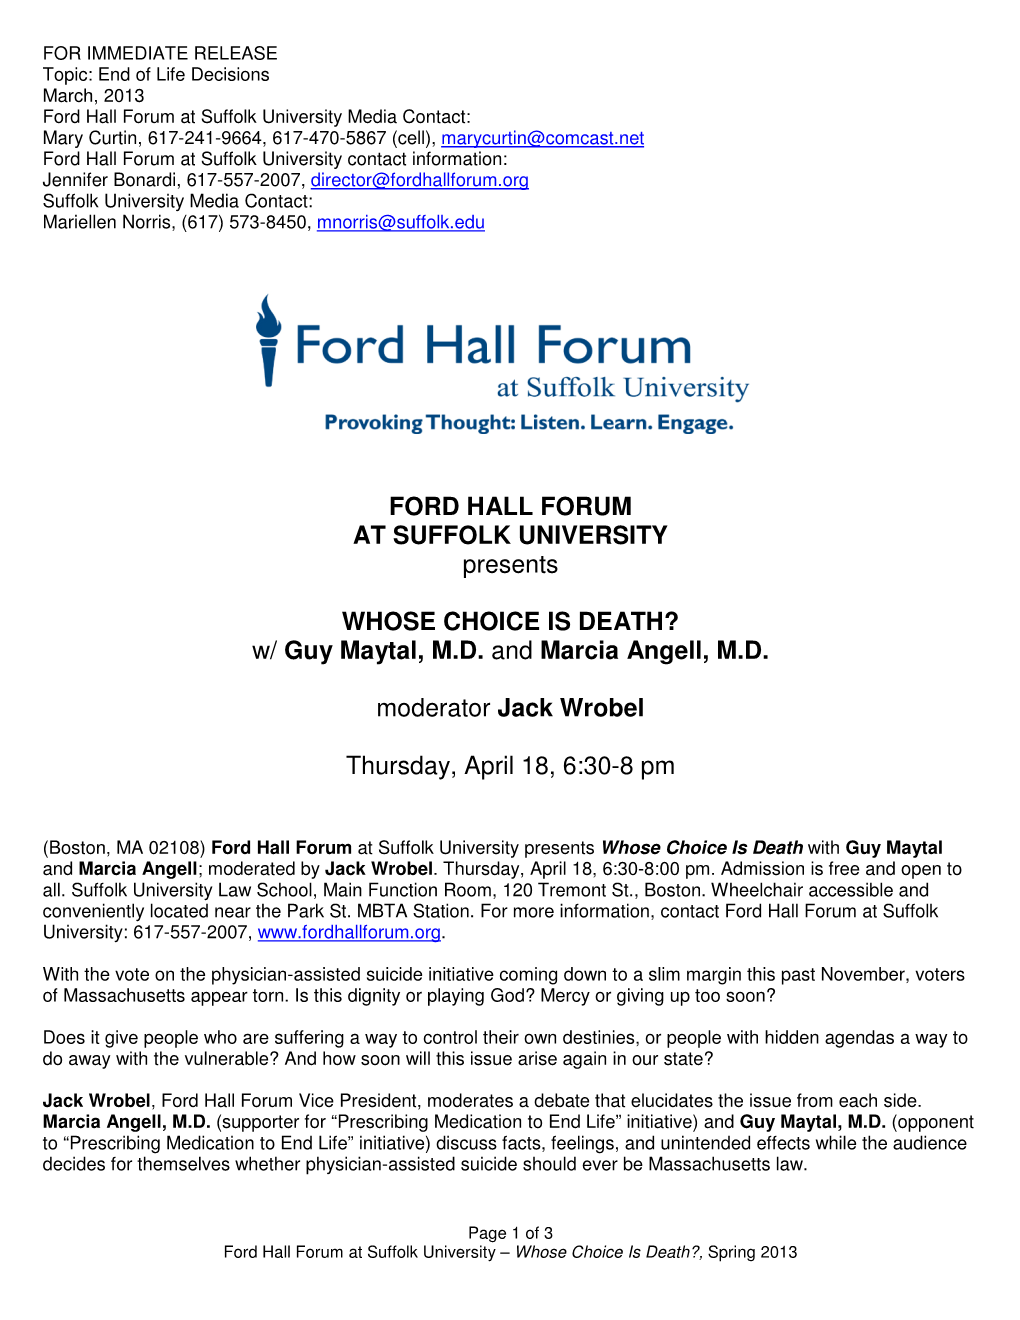 Ford Hall Forum at Suffolk University Presents Whose Choice Is Death with Guy Maytal and Marcia Angell ; Moderated by Jack Wrobel